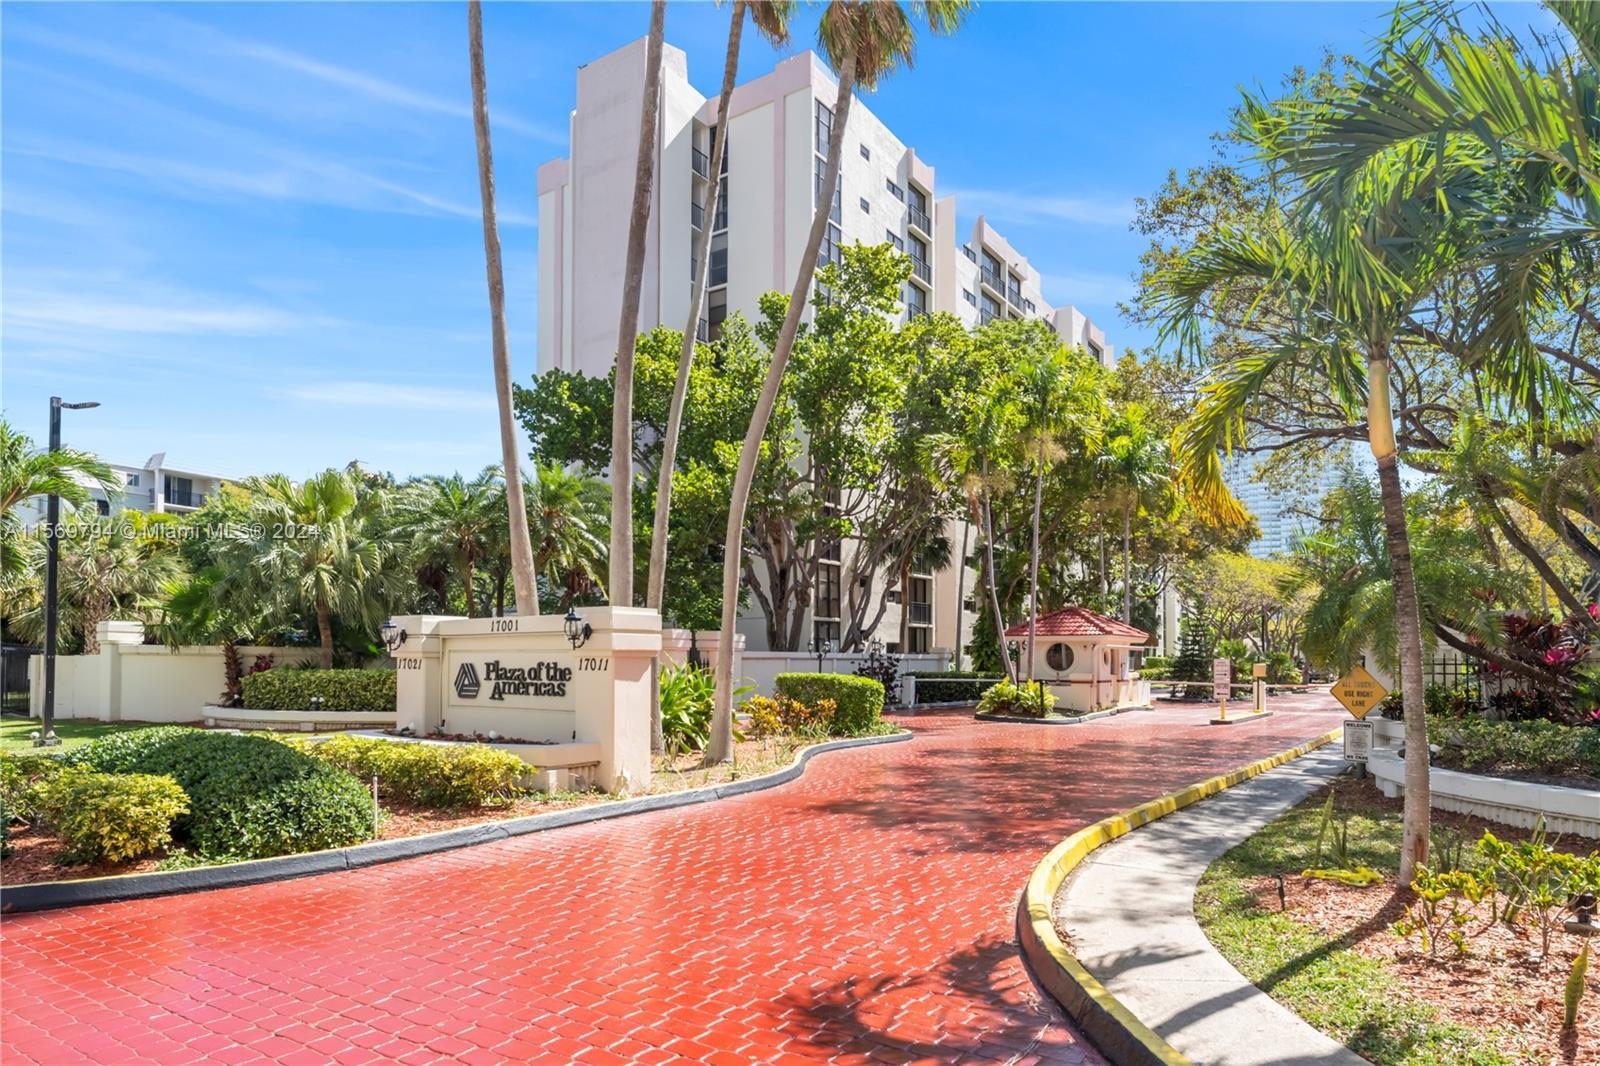 Large 1 bedroom/ 1.5 bath condo located in the HEART City of Sunny Isles Beach. An exceptional gated